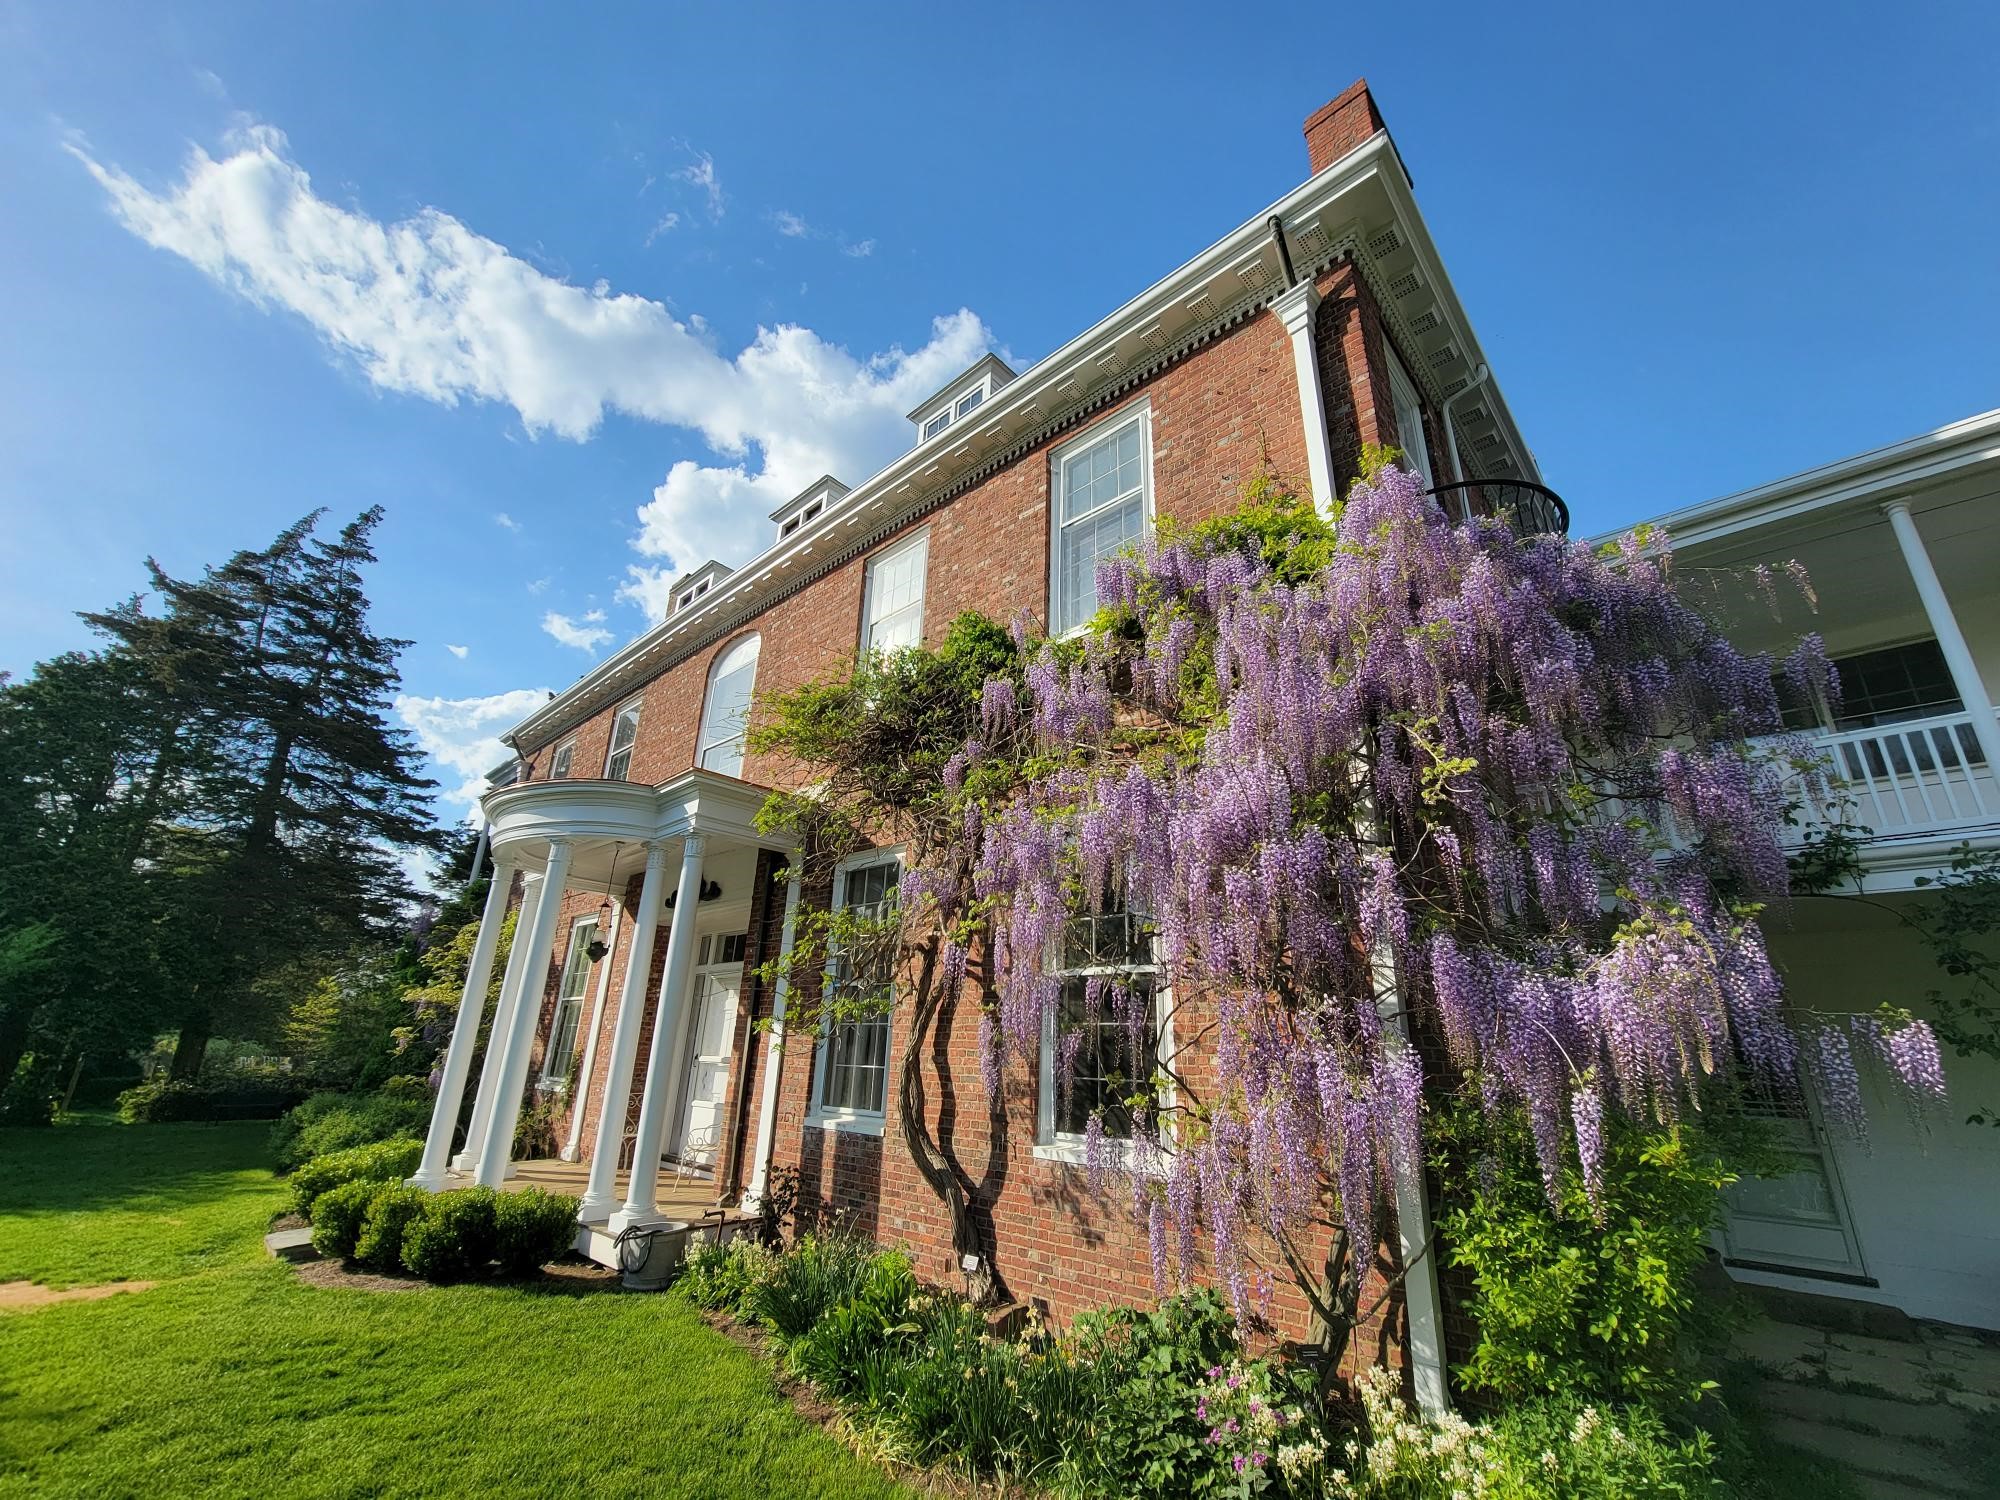 A brick house with purple wisteria in the front yard.